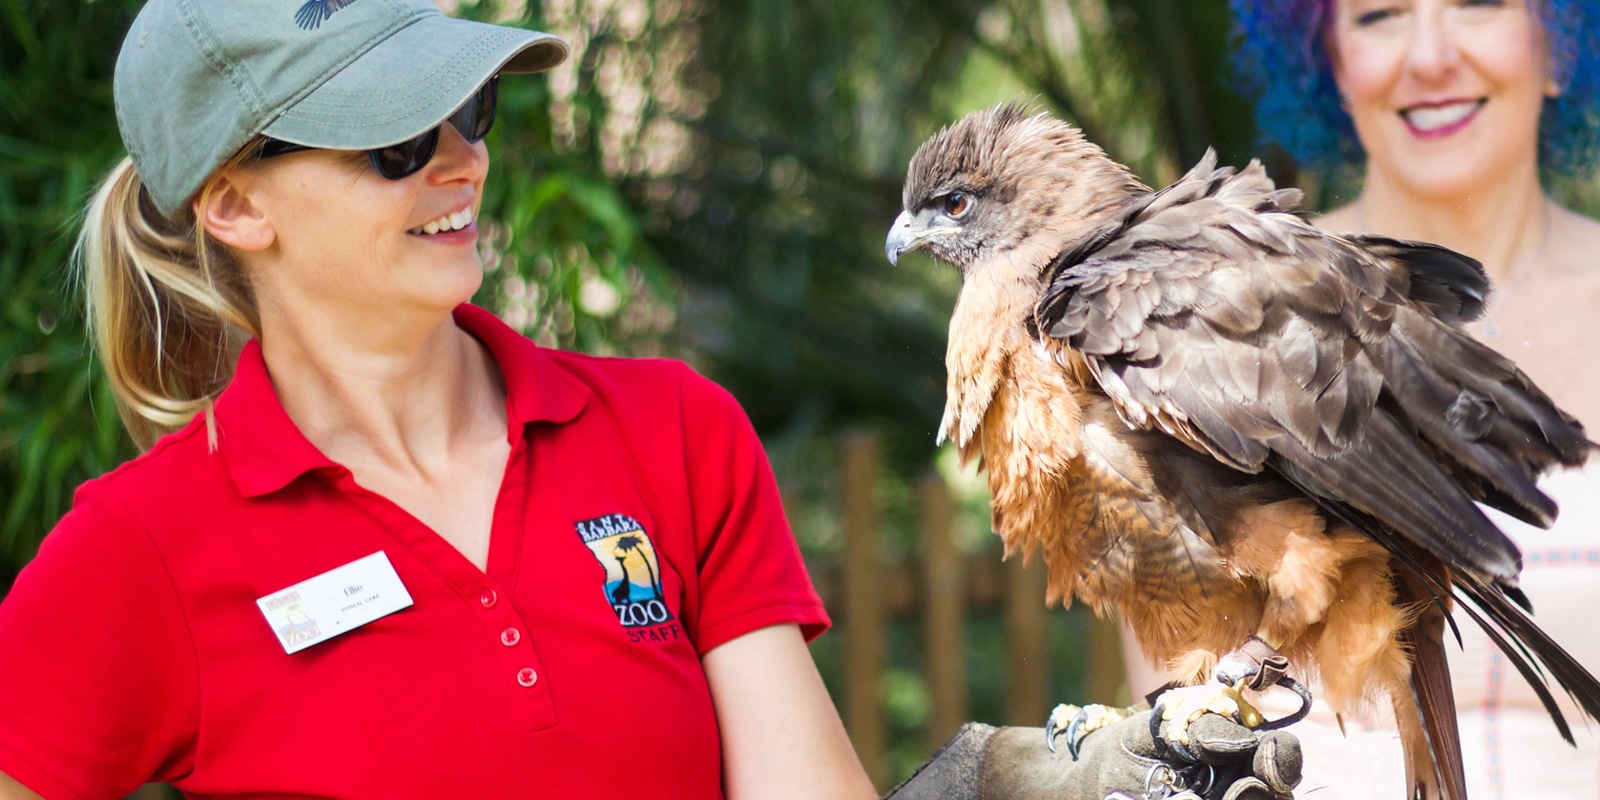 zookeeper looking at red-tailed hawk that is perched on her gloved hand